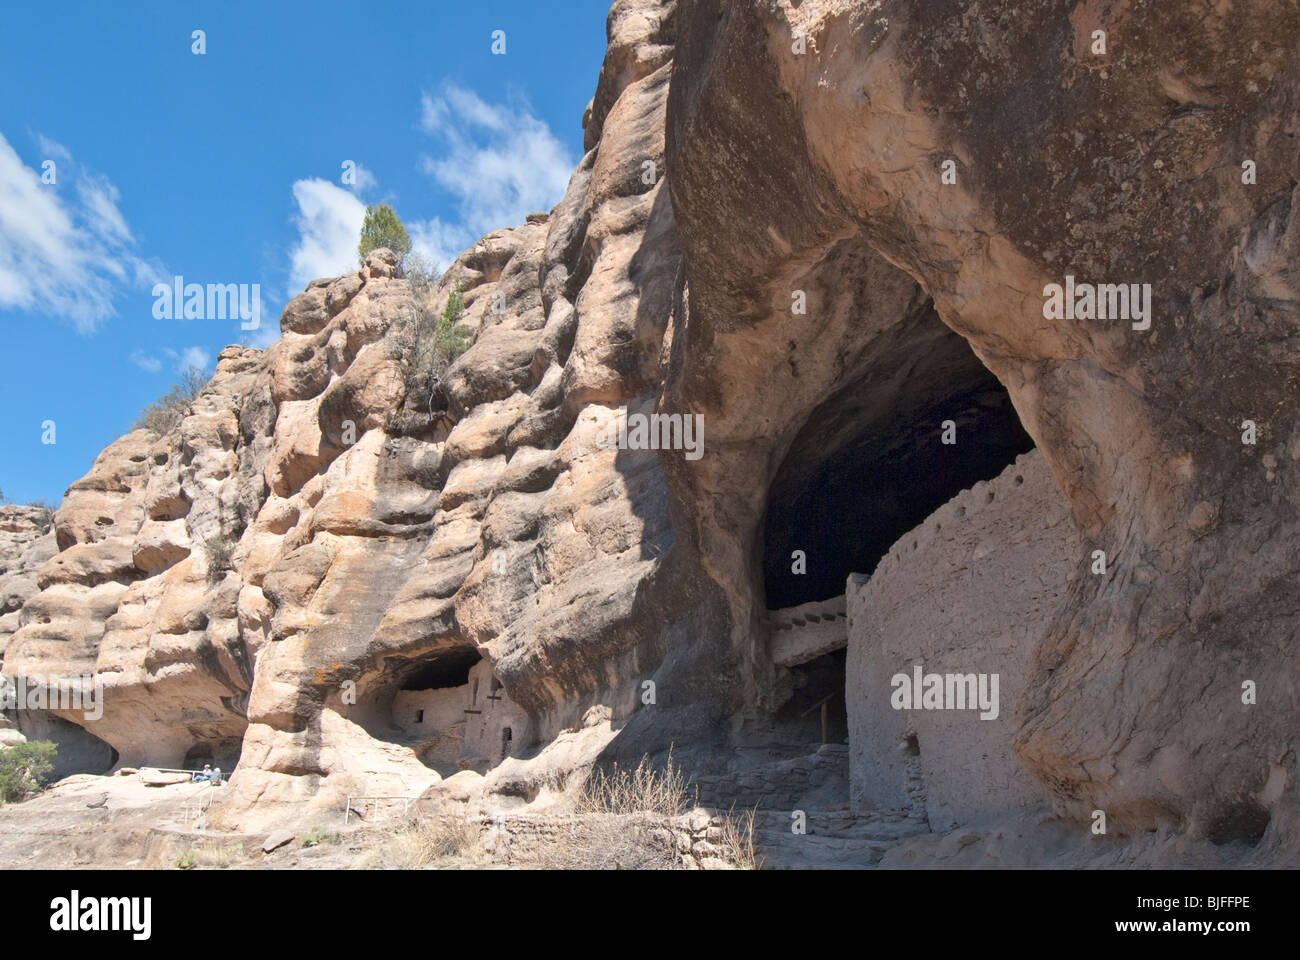 New Mexico, Gila Cliff Dwellings National Monument Stock Photo